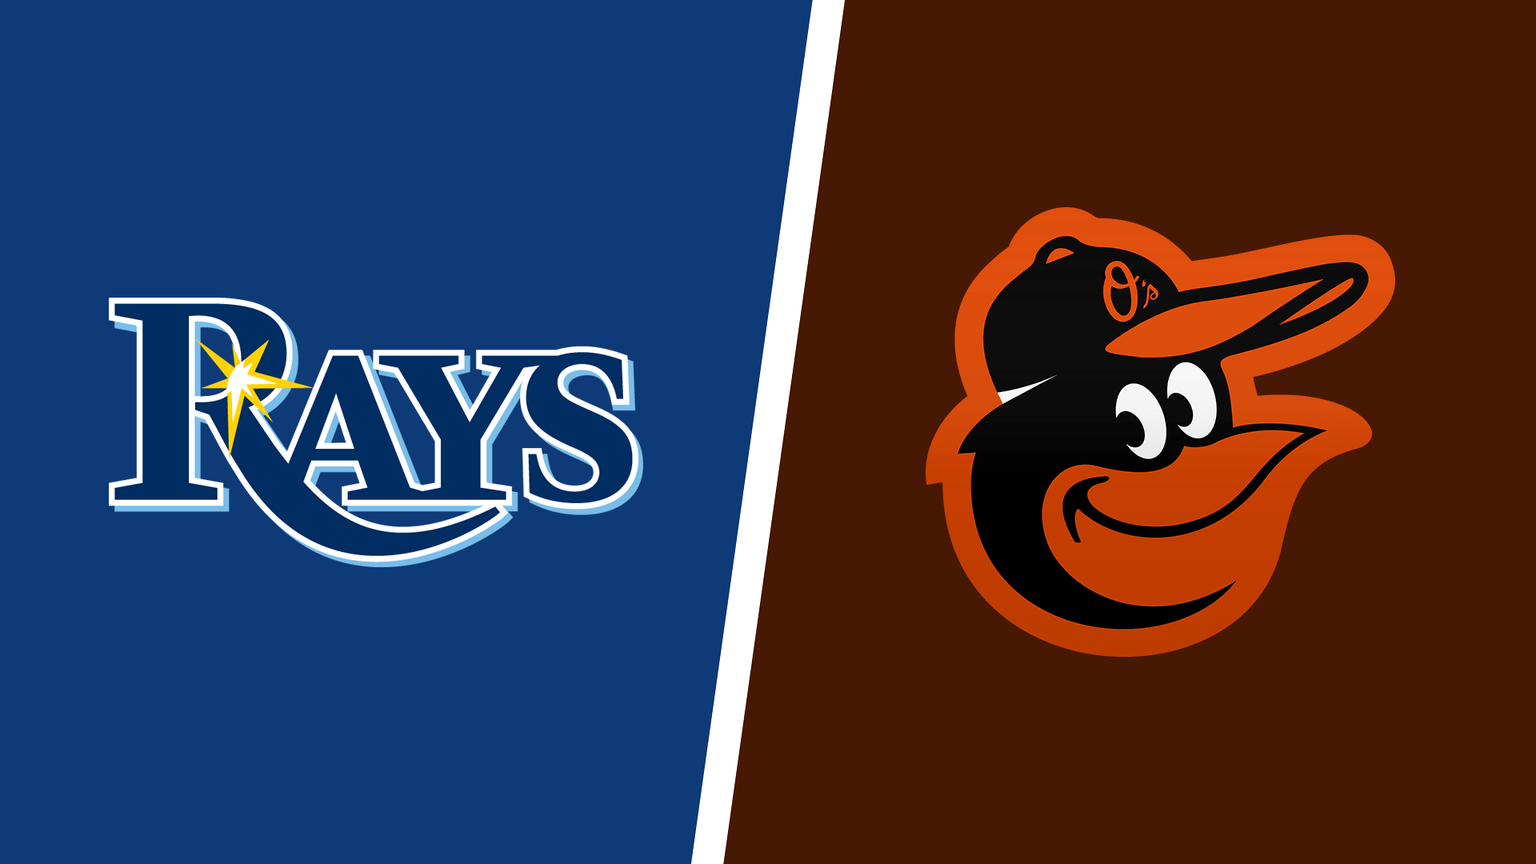 MLB TV Guide How to Watch Baltimore Orioles vs. Tampa Bay Rays Live